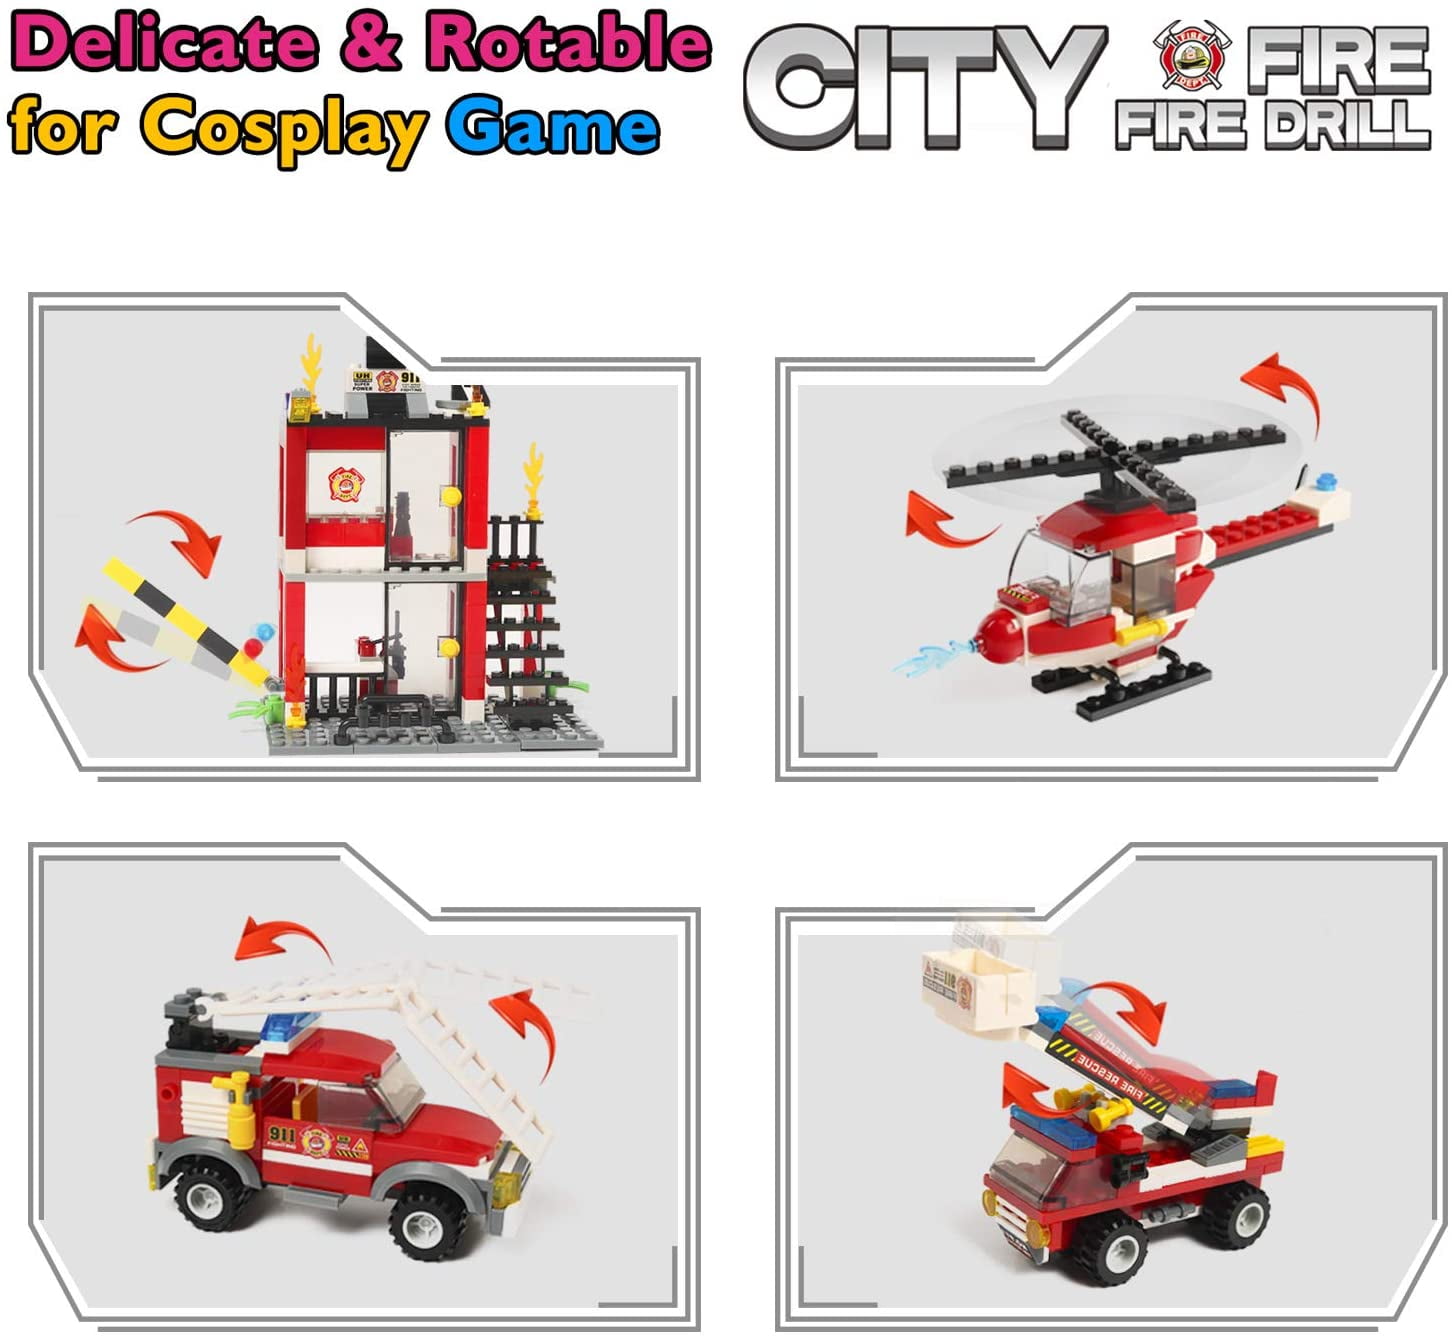 184pcs 2 in 1 City Fire Truck Fire Station Building Blocks Fire Engine Vehicles Set Fire Fighter Building Kit Fire Rescue Toys Xmas Gifts Present Building Bricks for Kids Aged 6-12 